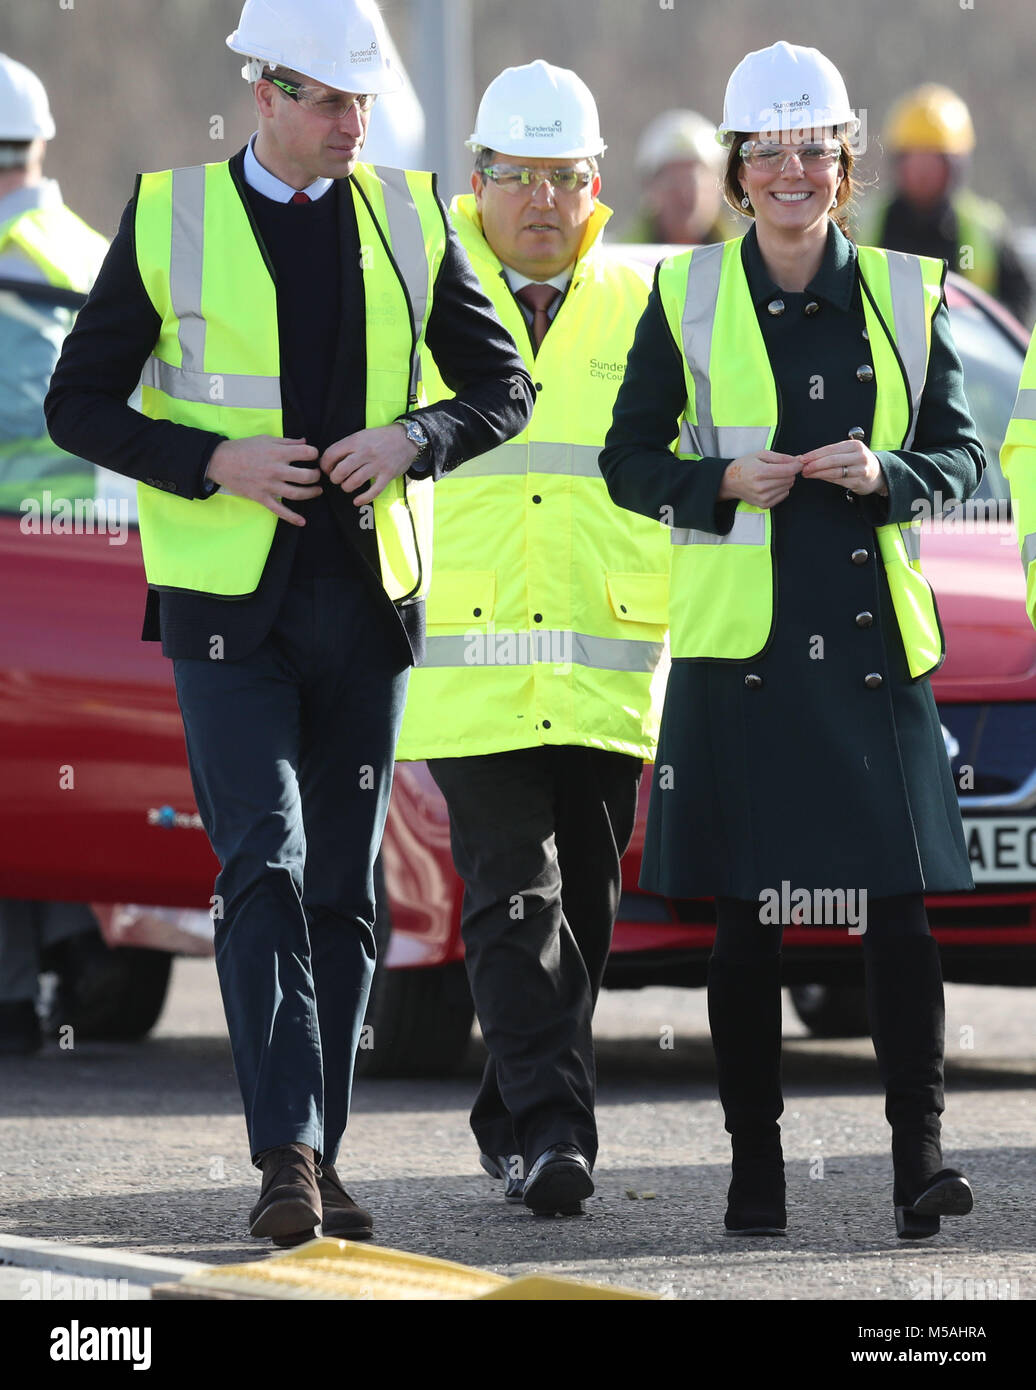 The Duke and Duchess of Cambridge wear safety helmets and high visibility vests during a visit to the Northern Spire bridge across the River Wear in Sunderland. Stock Photo